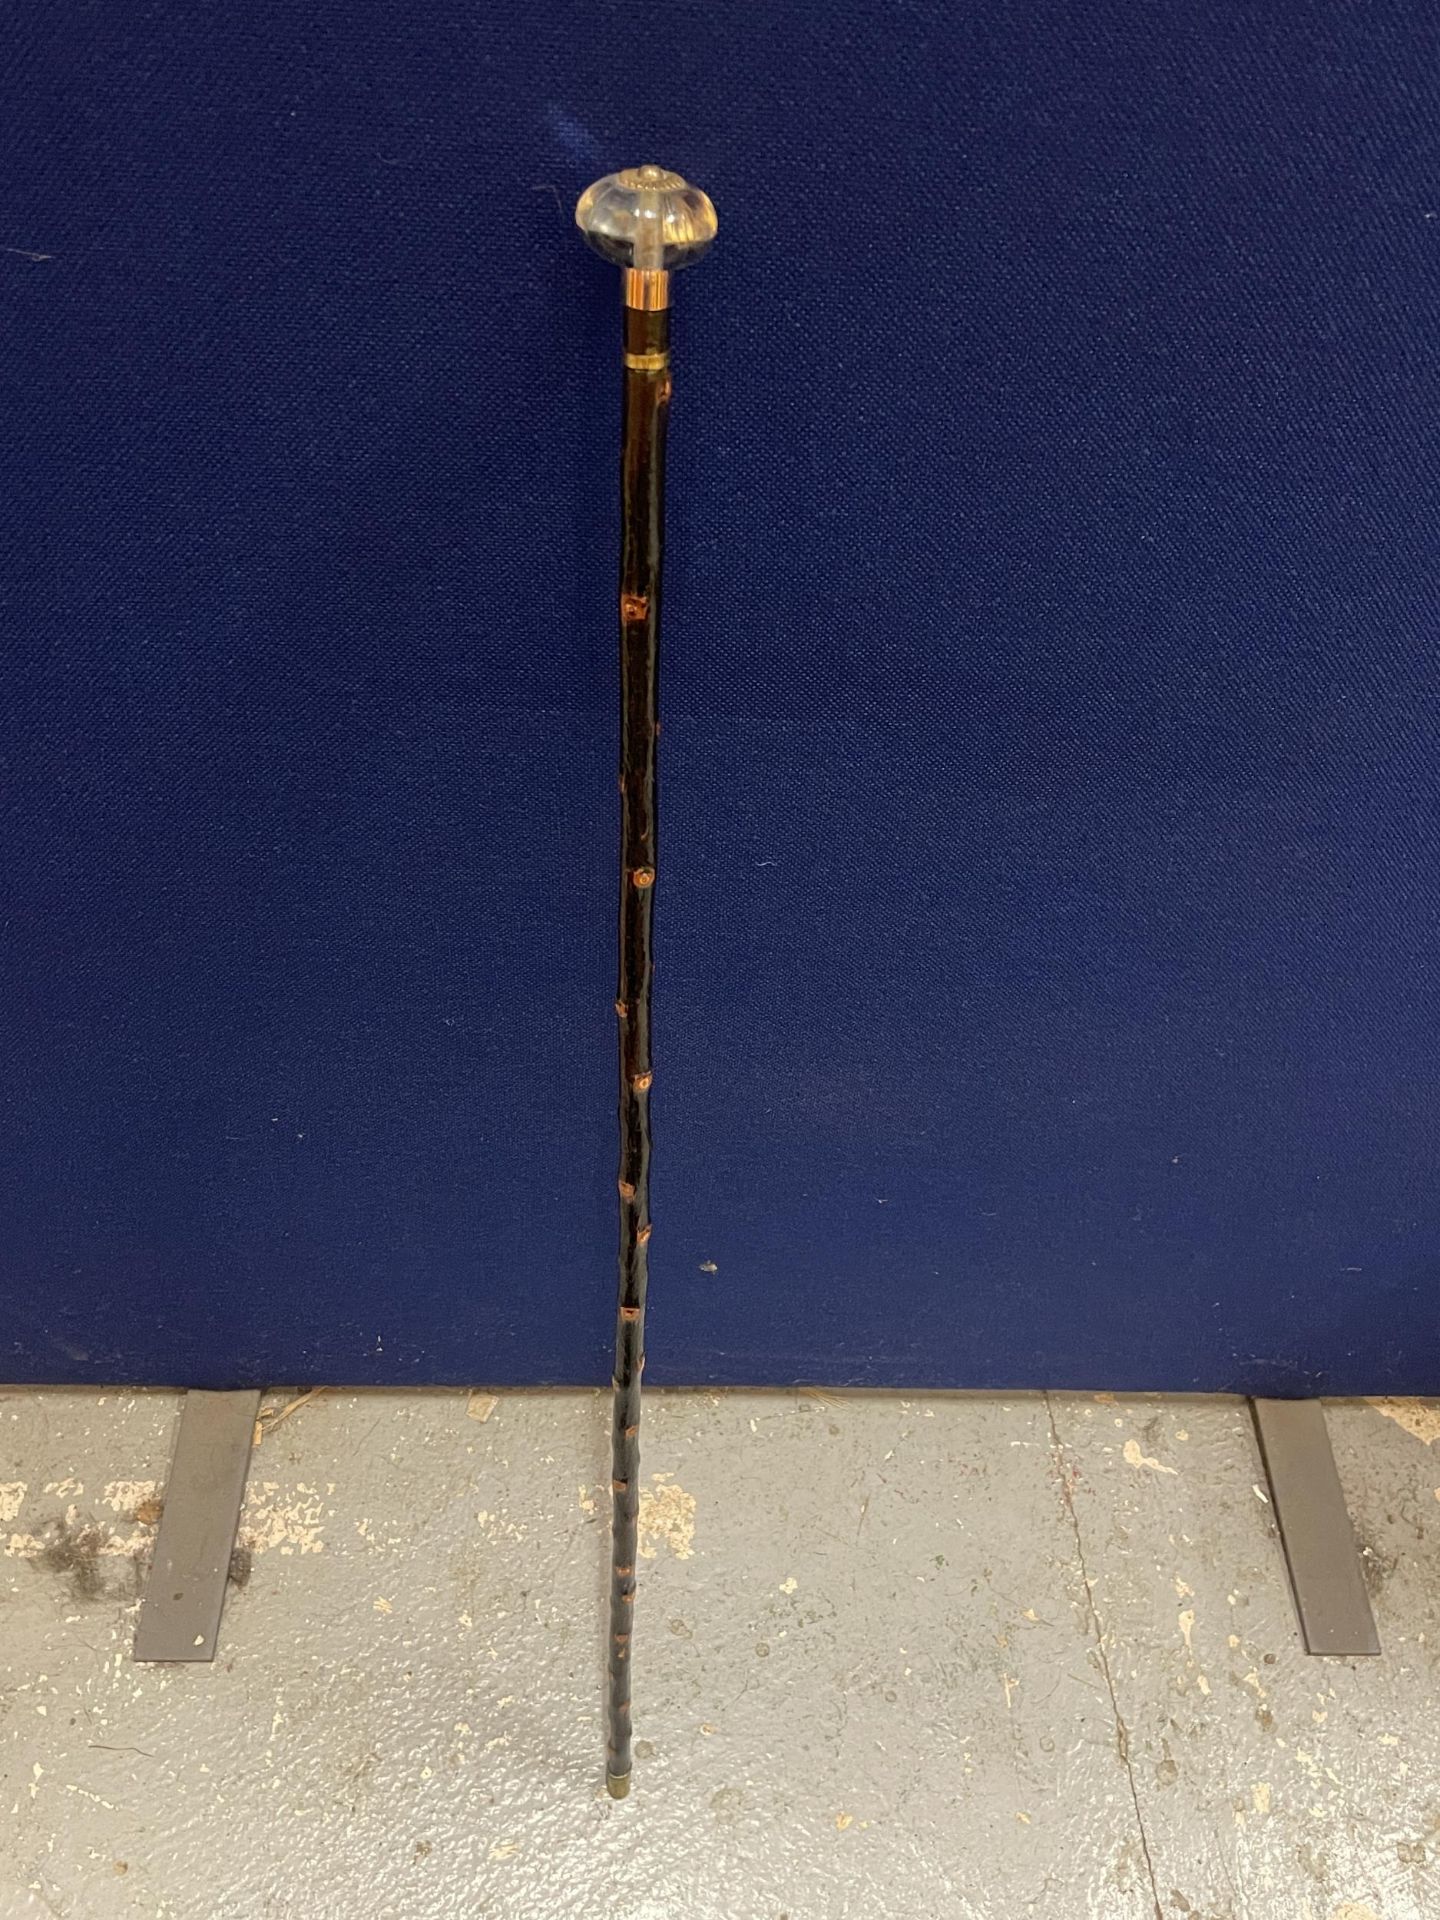 A VINTAGE WALKING STICK WITH GLASS TOP AND METAL BANDING